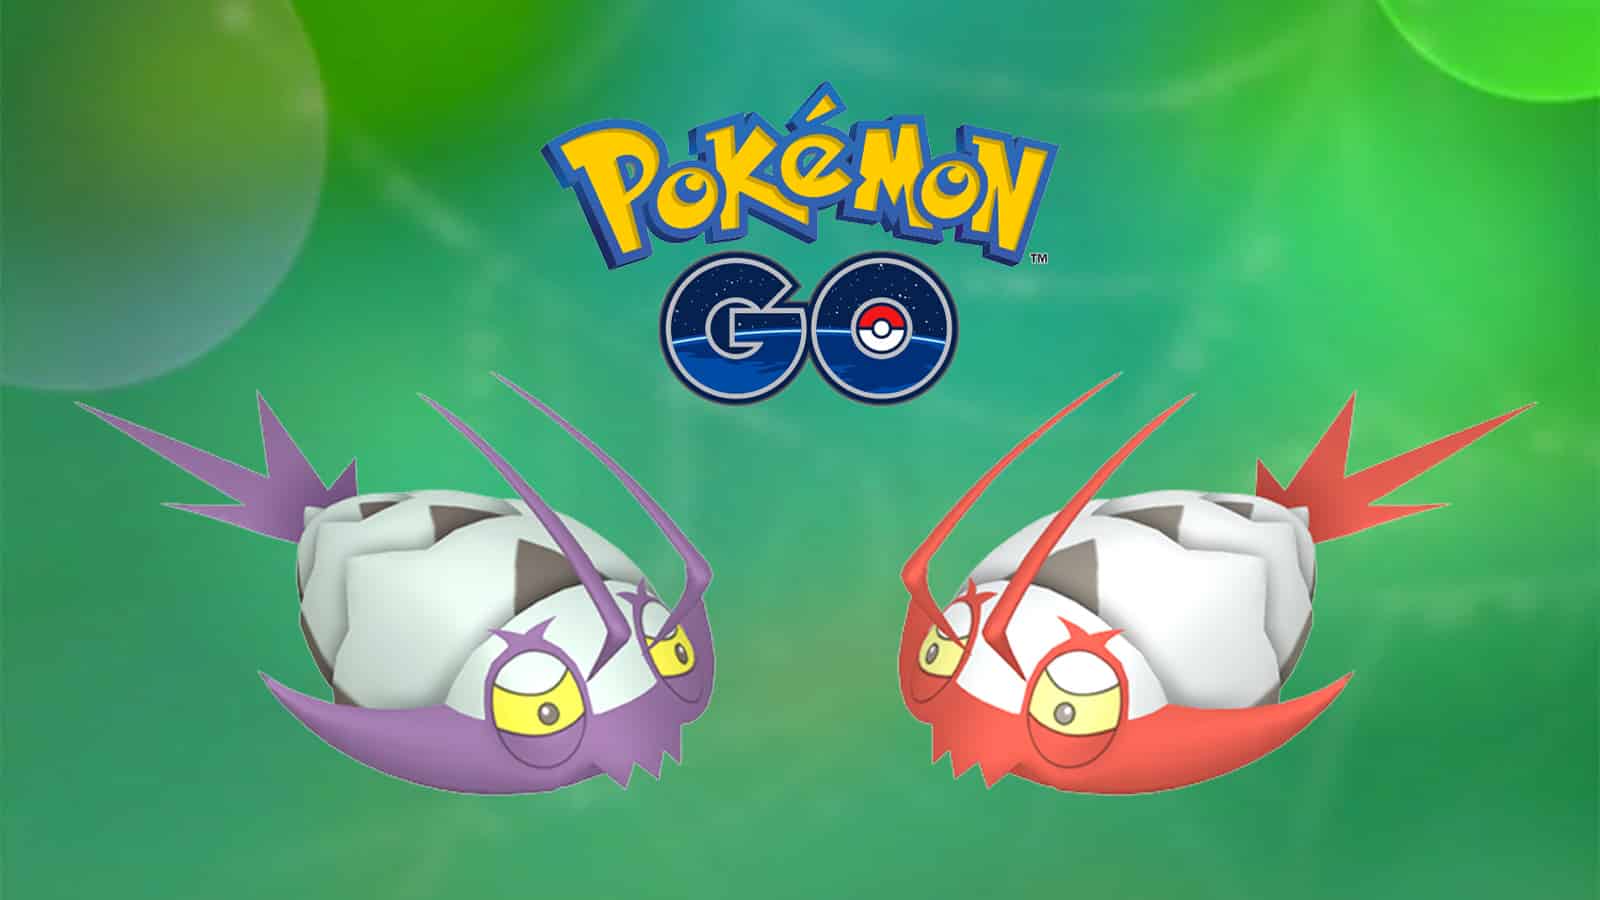 Pokémon Go shiny – how to find them and which are available